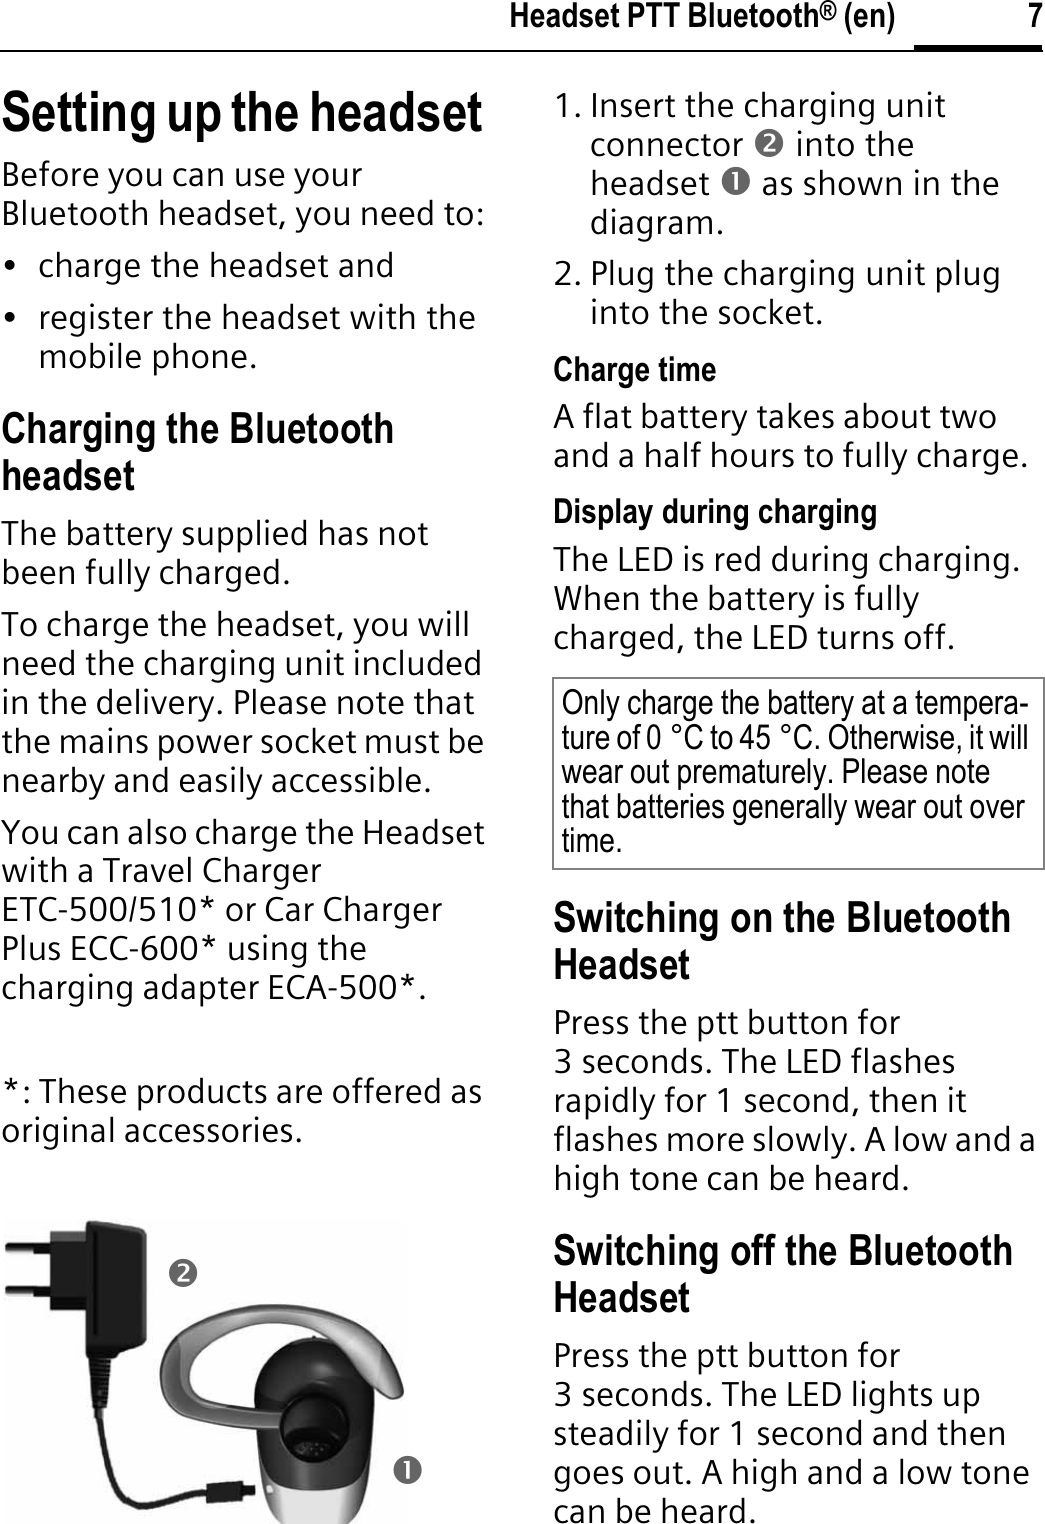 7Headset PTT Bluetooth® (en)Setting up the headset Before you can use your Bluetooth headset, you need to:• charge the headset and• register the headset with the mobile phone.Charging the Bluetooth headsetThe battery supplied has not been fully charged.To charge the headset, you will need the charging unit included in the delivery. Please note that the mains power socket must be nearby and easily accessible.You can also charge the Headset with a Travel Charger ETC-500/510* or Car Charger Plus ECC-600* using the charging adapter ECA-500*.*: These products are offered as original accessories.1. Insert the charging unit connector o into the headset n as shown in the diagram.2. Plug the charging unit plug into the socket. Charge timeA flat battery takes about two and a half hours to fully charge.Display during chargingThe LED is red during charging. When the battery is fully charged, the LED turns off.Switching on the Bluetooth HeadsetPress the ptt button for 3 seconds. The LED flashes rapidly for 1 second, then it flashes more slowly. A low and a high tone can be heard.Switching off the Bluetooth HeadsetPress the ptt button for 3 seconds. The LED lights up steadily for 1 second and then goes out. A high and a low tone can be heard.onOnly charge the battery at a tempera-ture of 0 °C to 45 °C. Otherwise, it will wear out prematurely. Please note that batteries generally wear out over time.